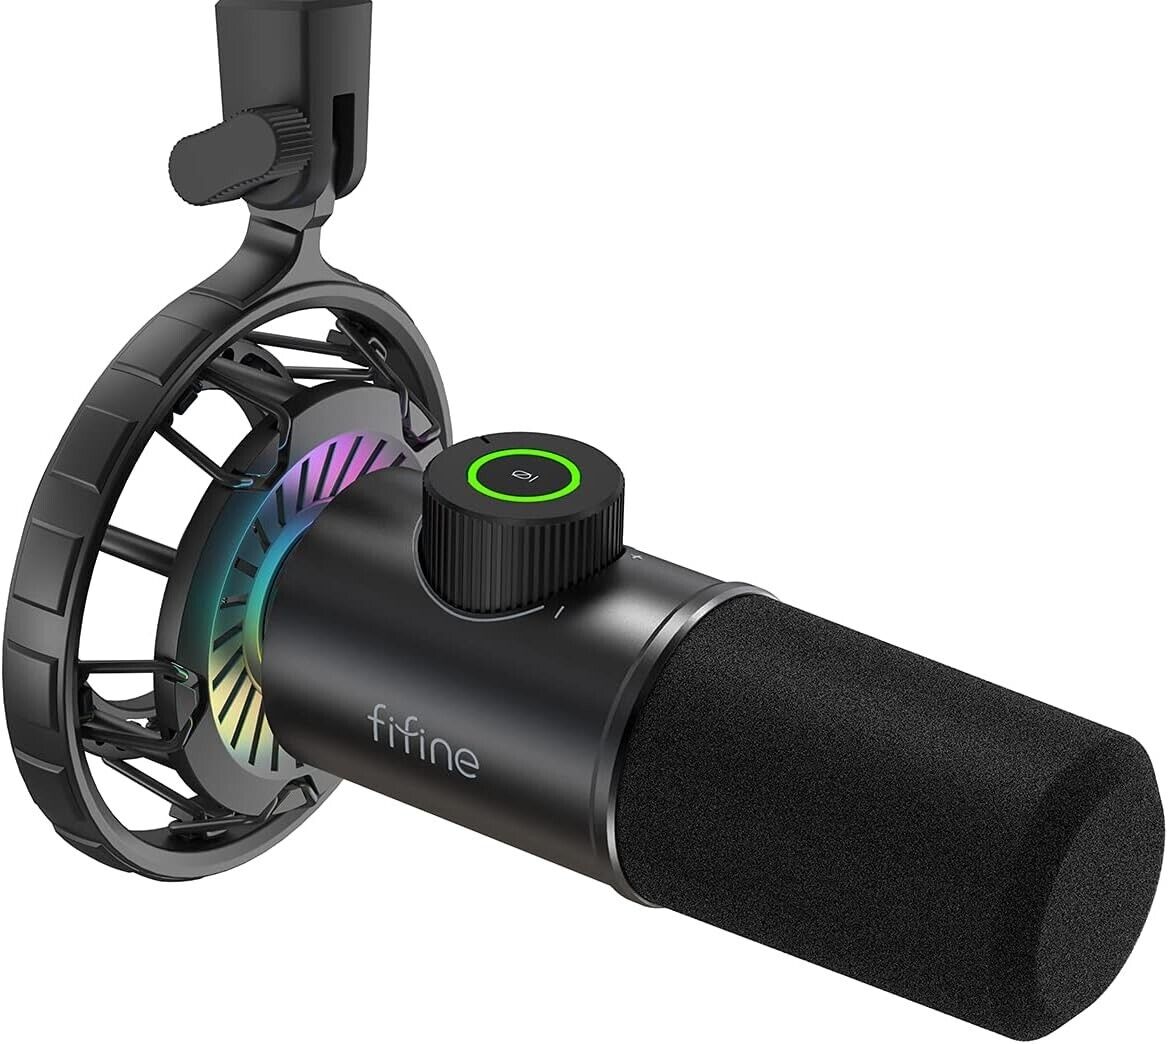 FIFINE USB Gaming Microphone, RGB Dynamic Mic for PC, with Tap-to-Mute Button